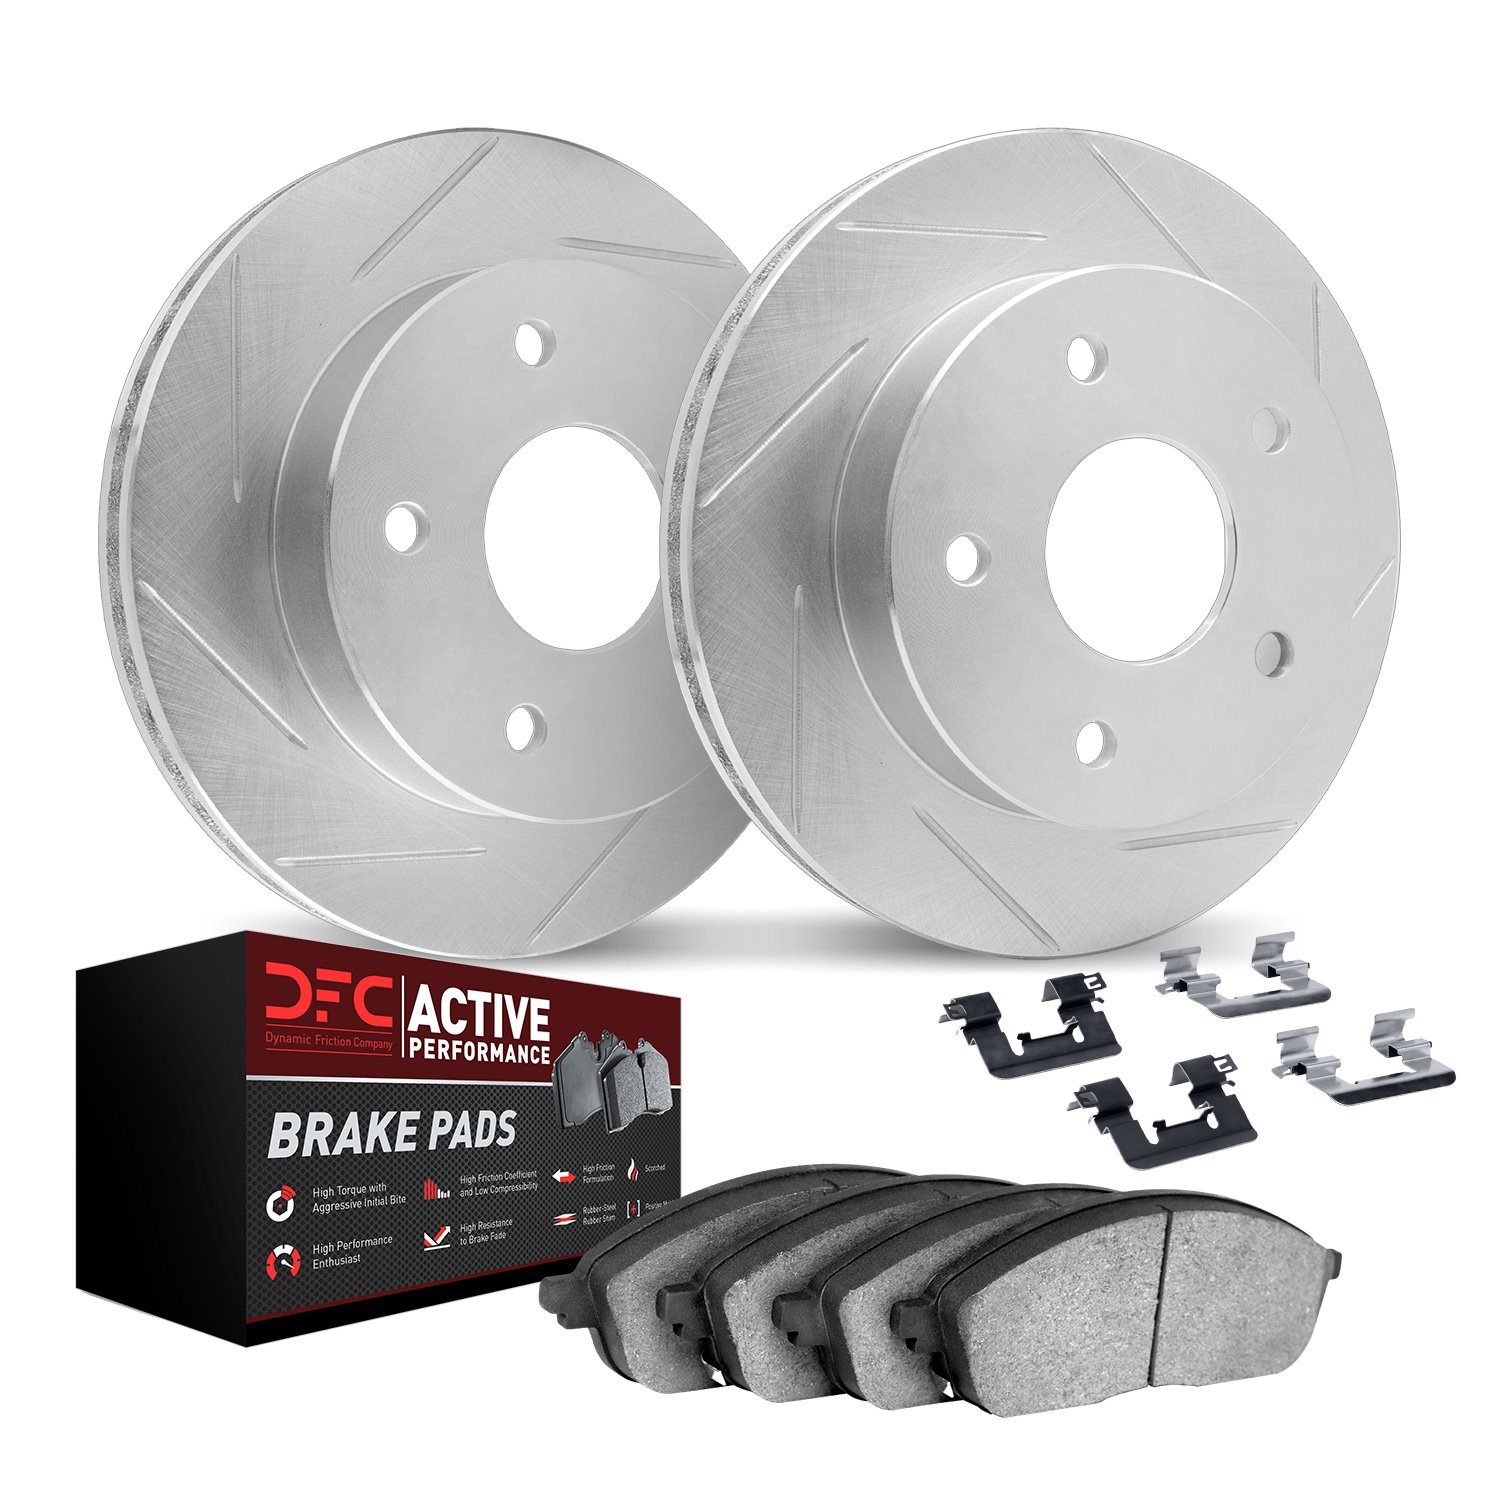 2712-01012 Geoperformance Slotted Brake Rotors with Active Performance Pads Kits & Hardware, 2009-2017 Suzuki, Position: Rear